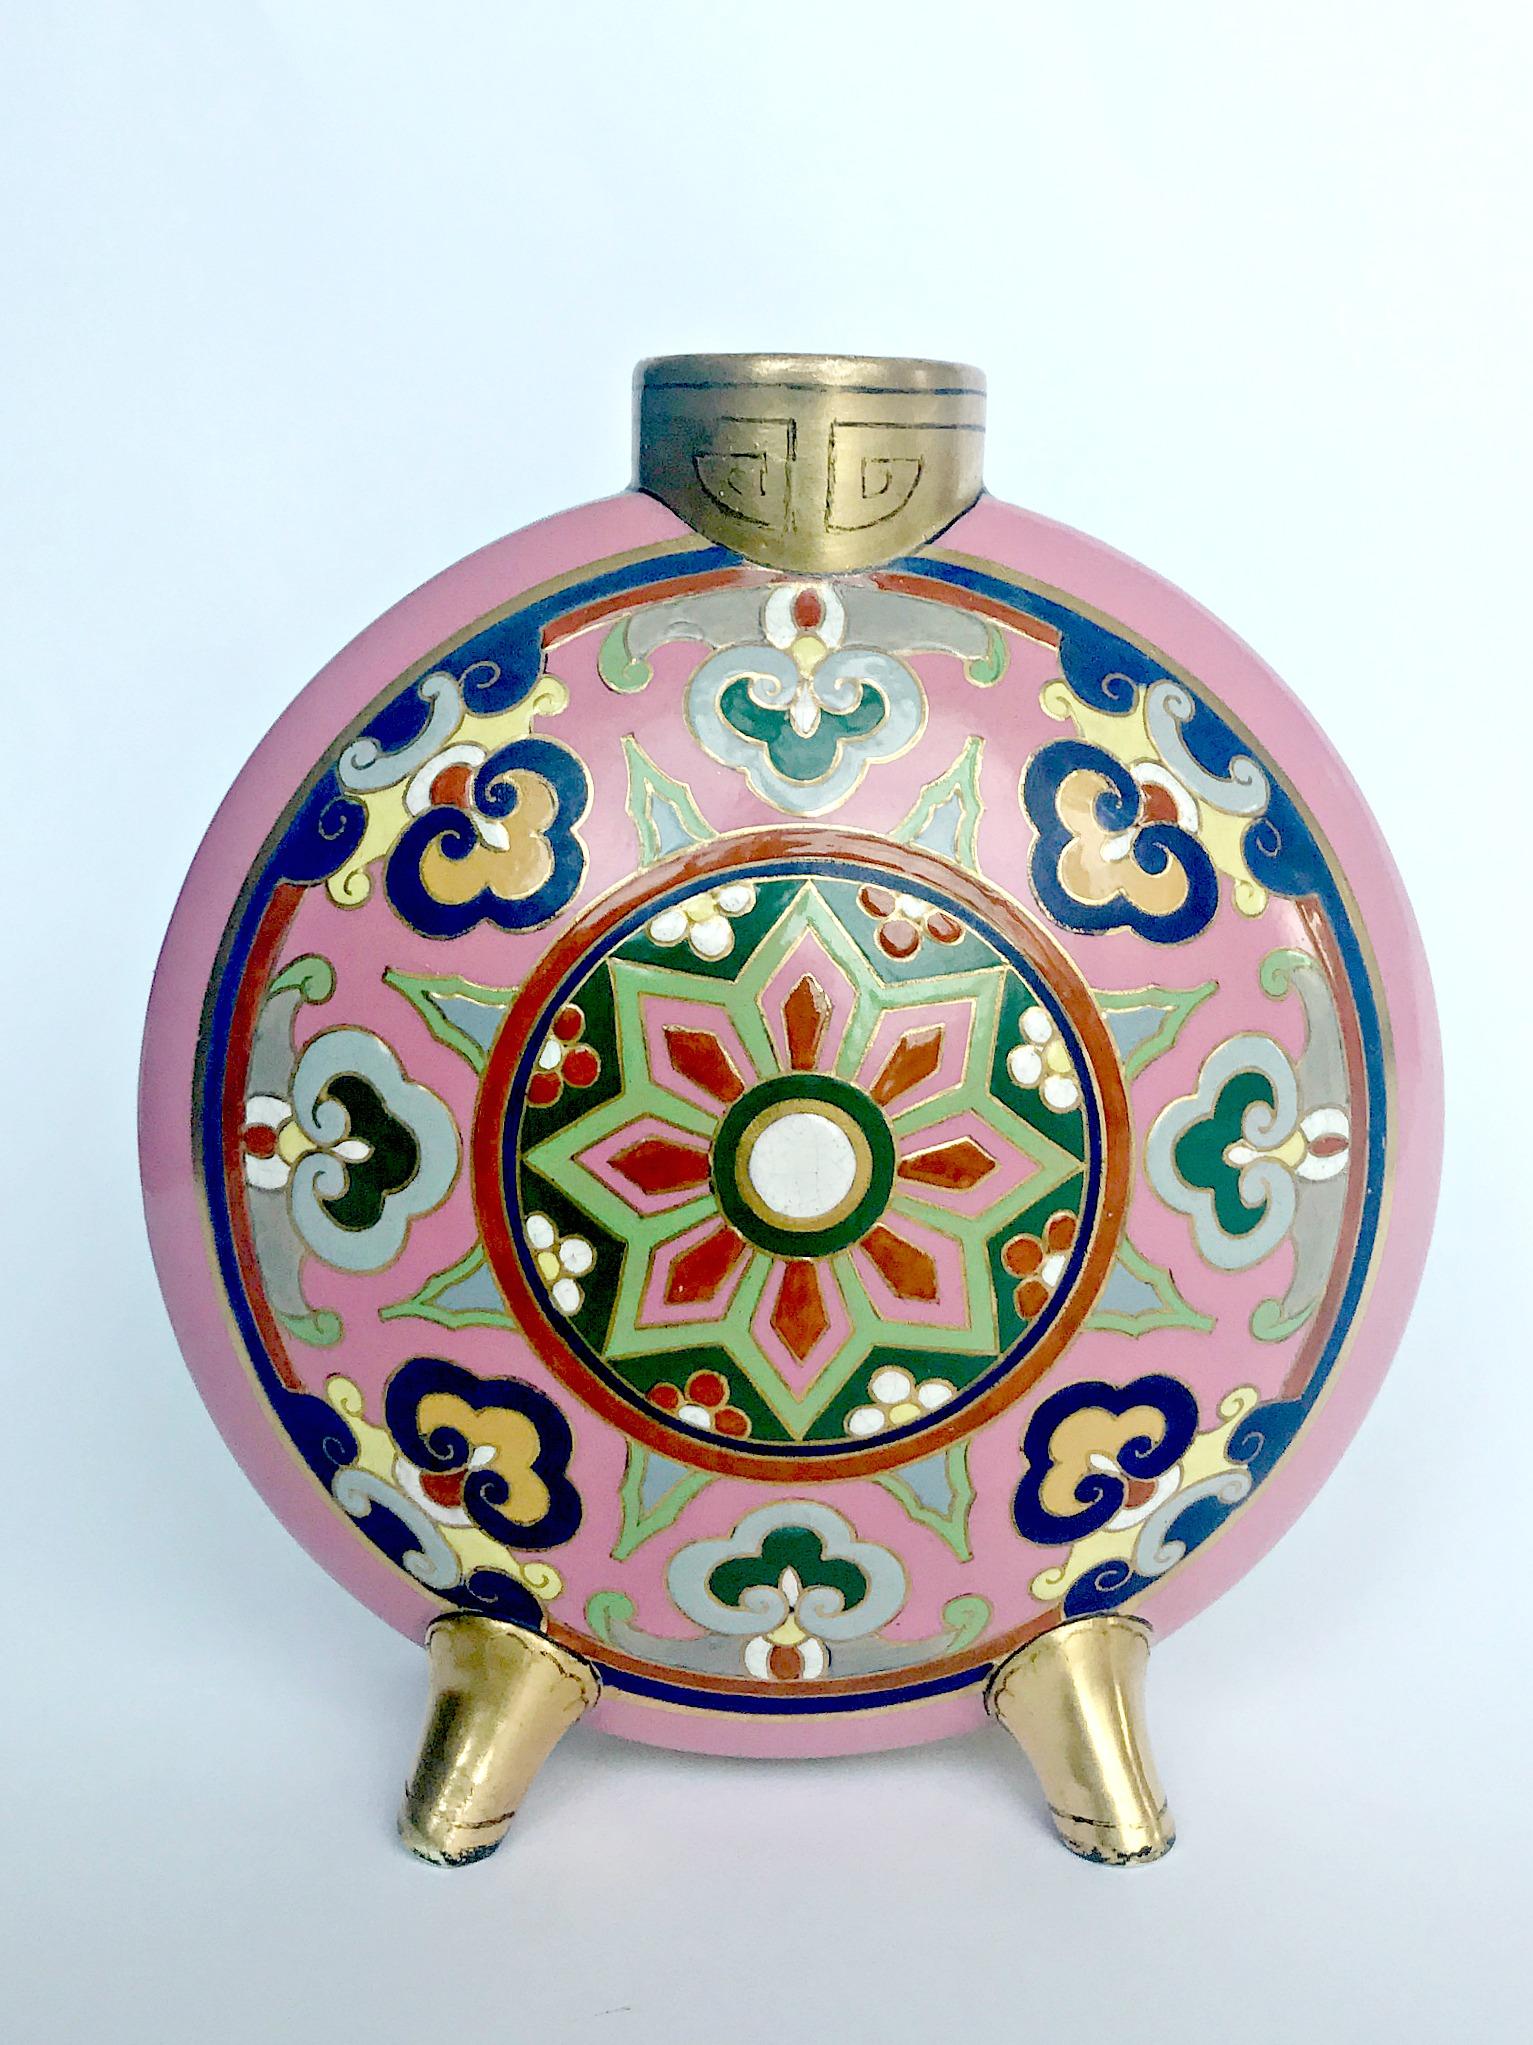 A rare Minton porcelain Aesthetic Movement porcelain vase designed by Christopher Dresser circa 1875 decorated in the 'cloisonné' with polychrome stylised enameled motif against a pink ground, the neck and legs decorated in 22ct gilding.

No